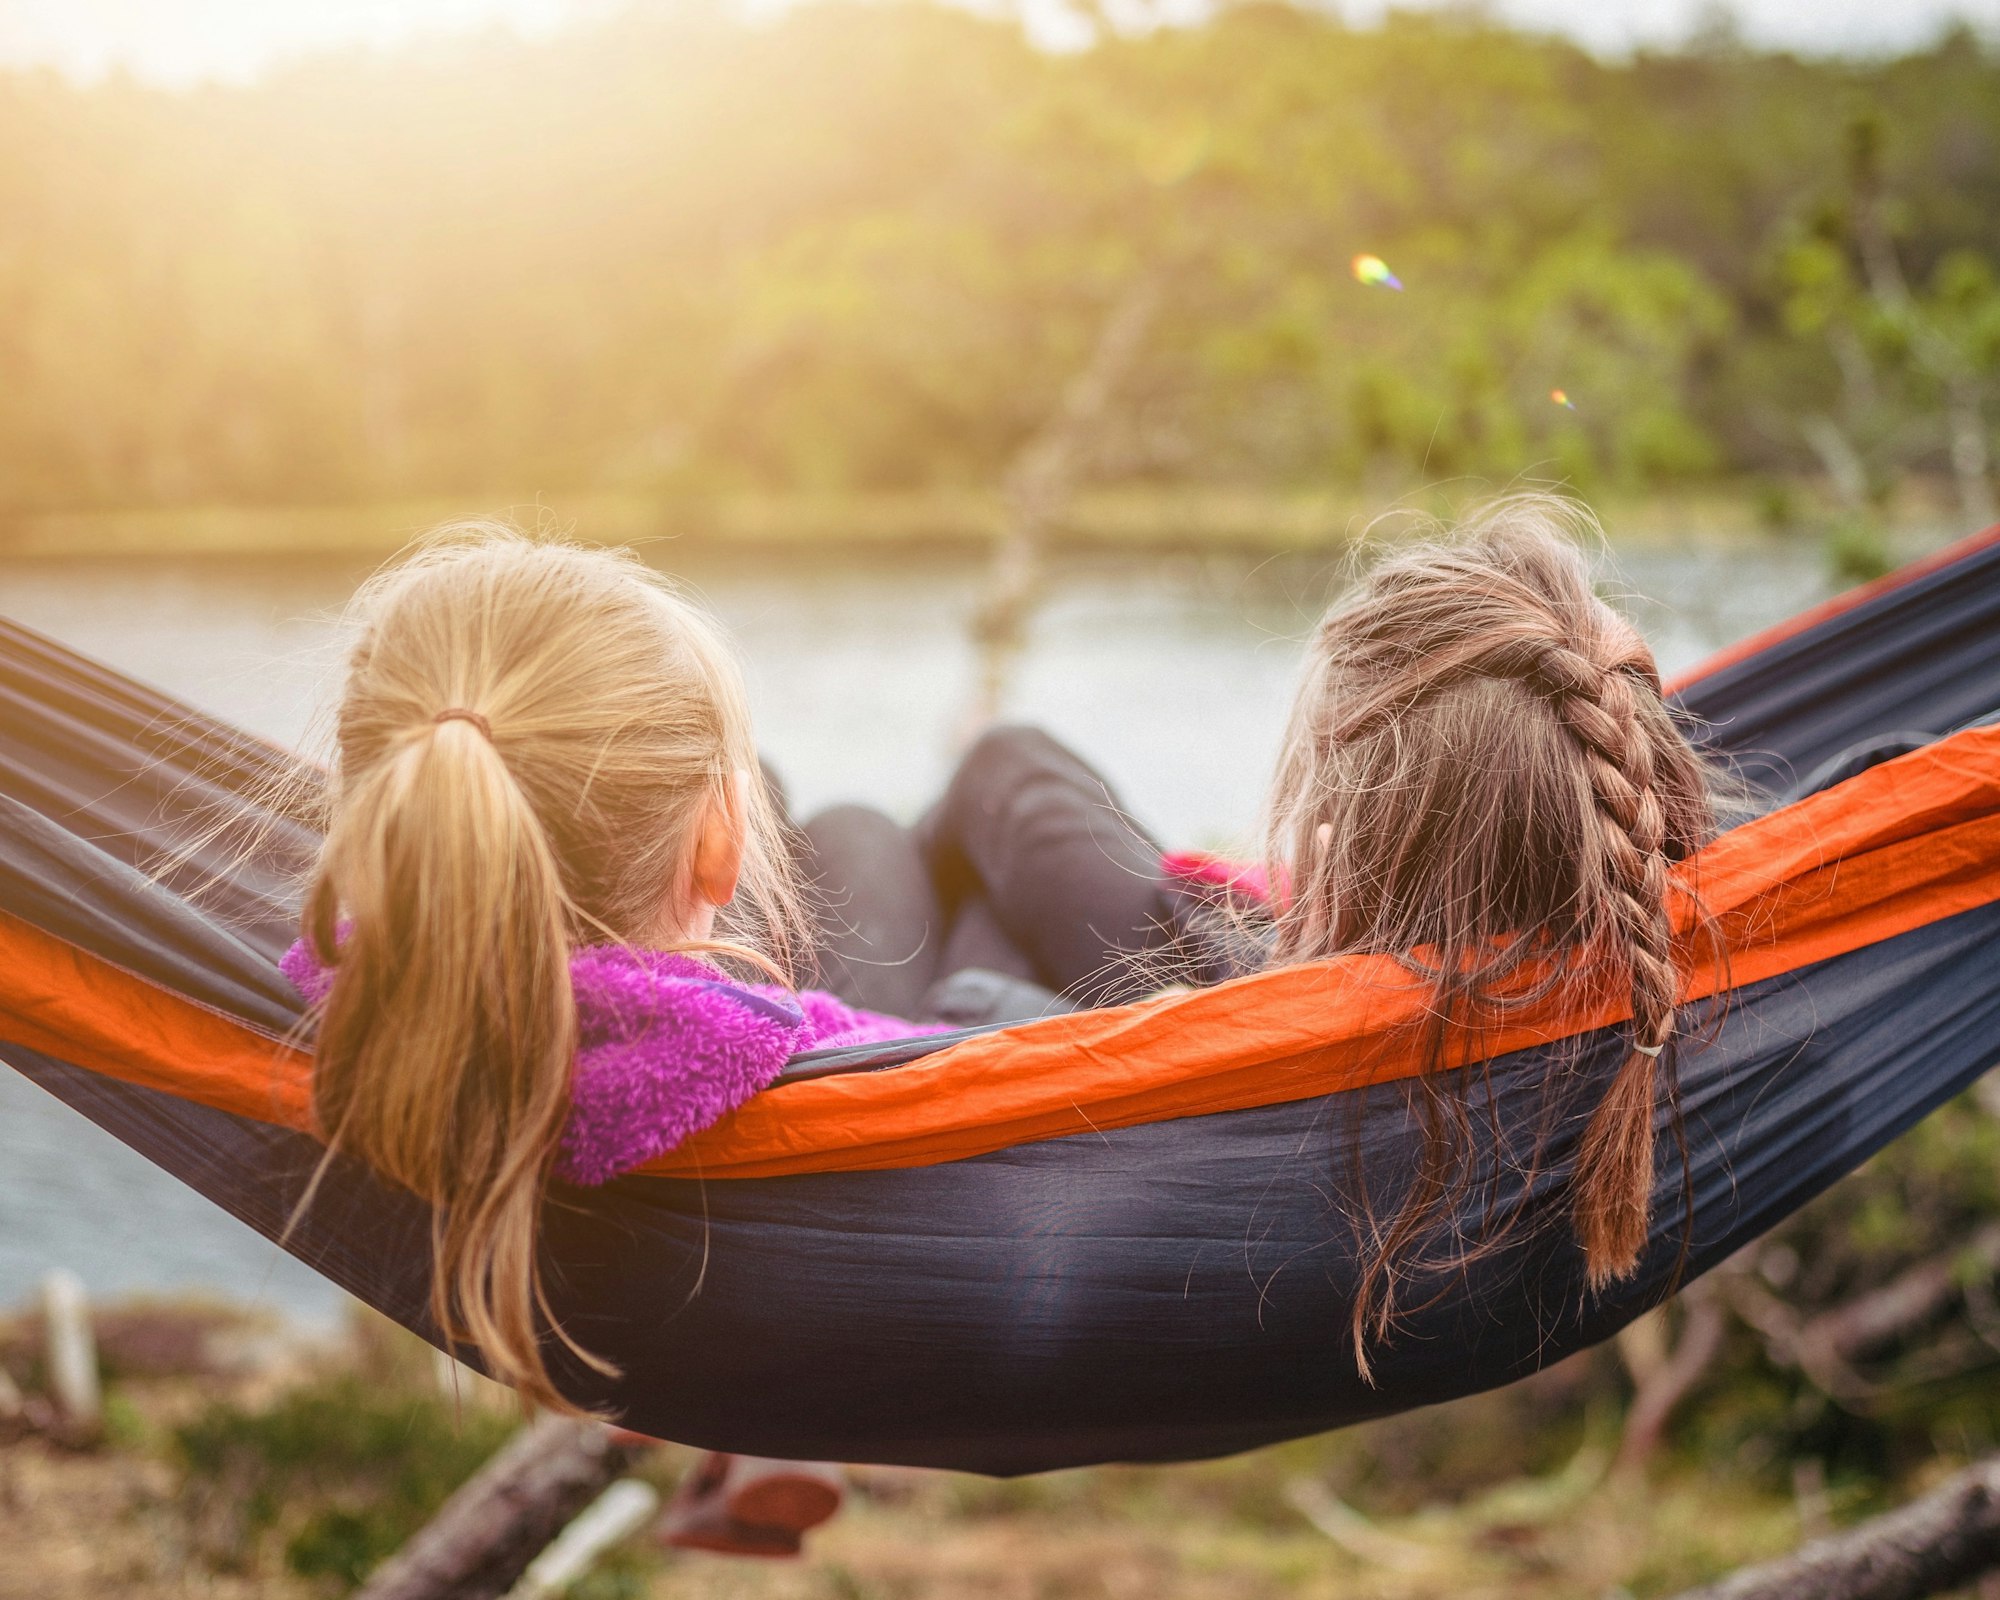 Two girls are side-by-side in a hammock, facing away from the camera.